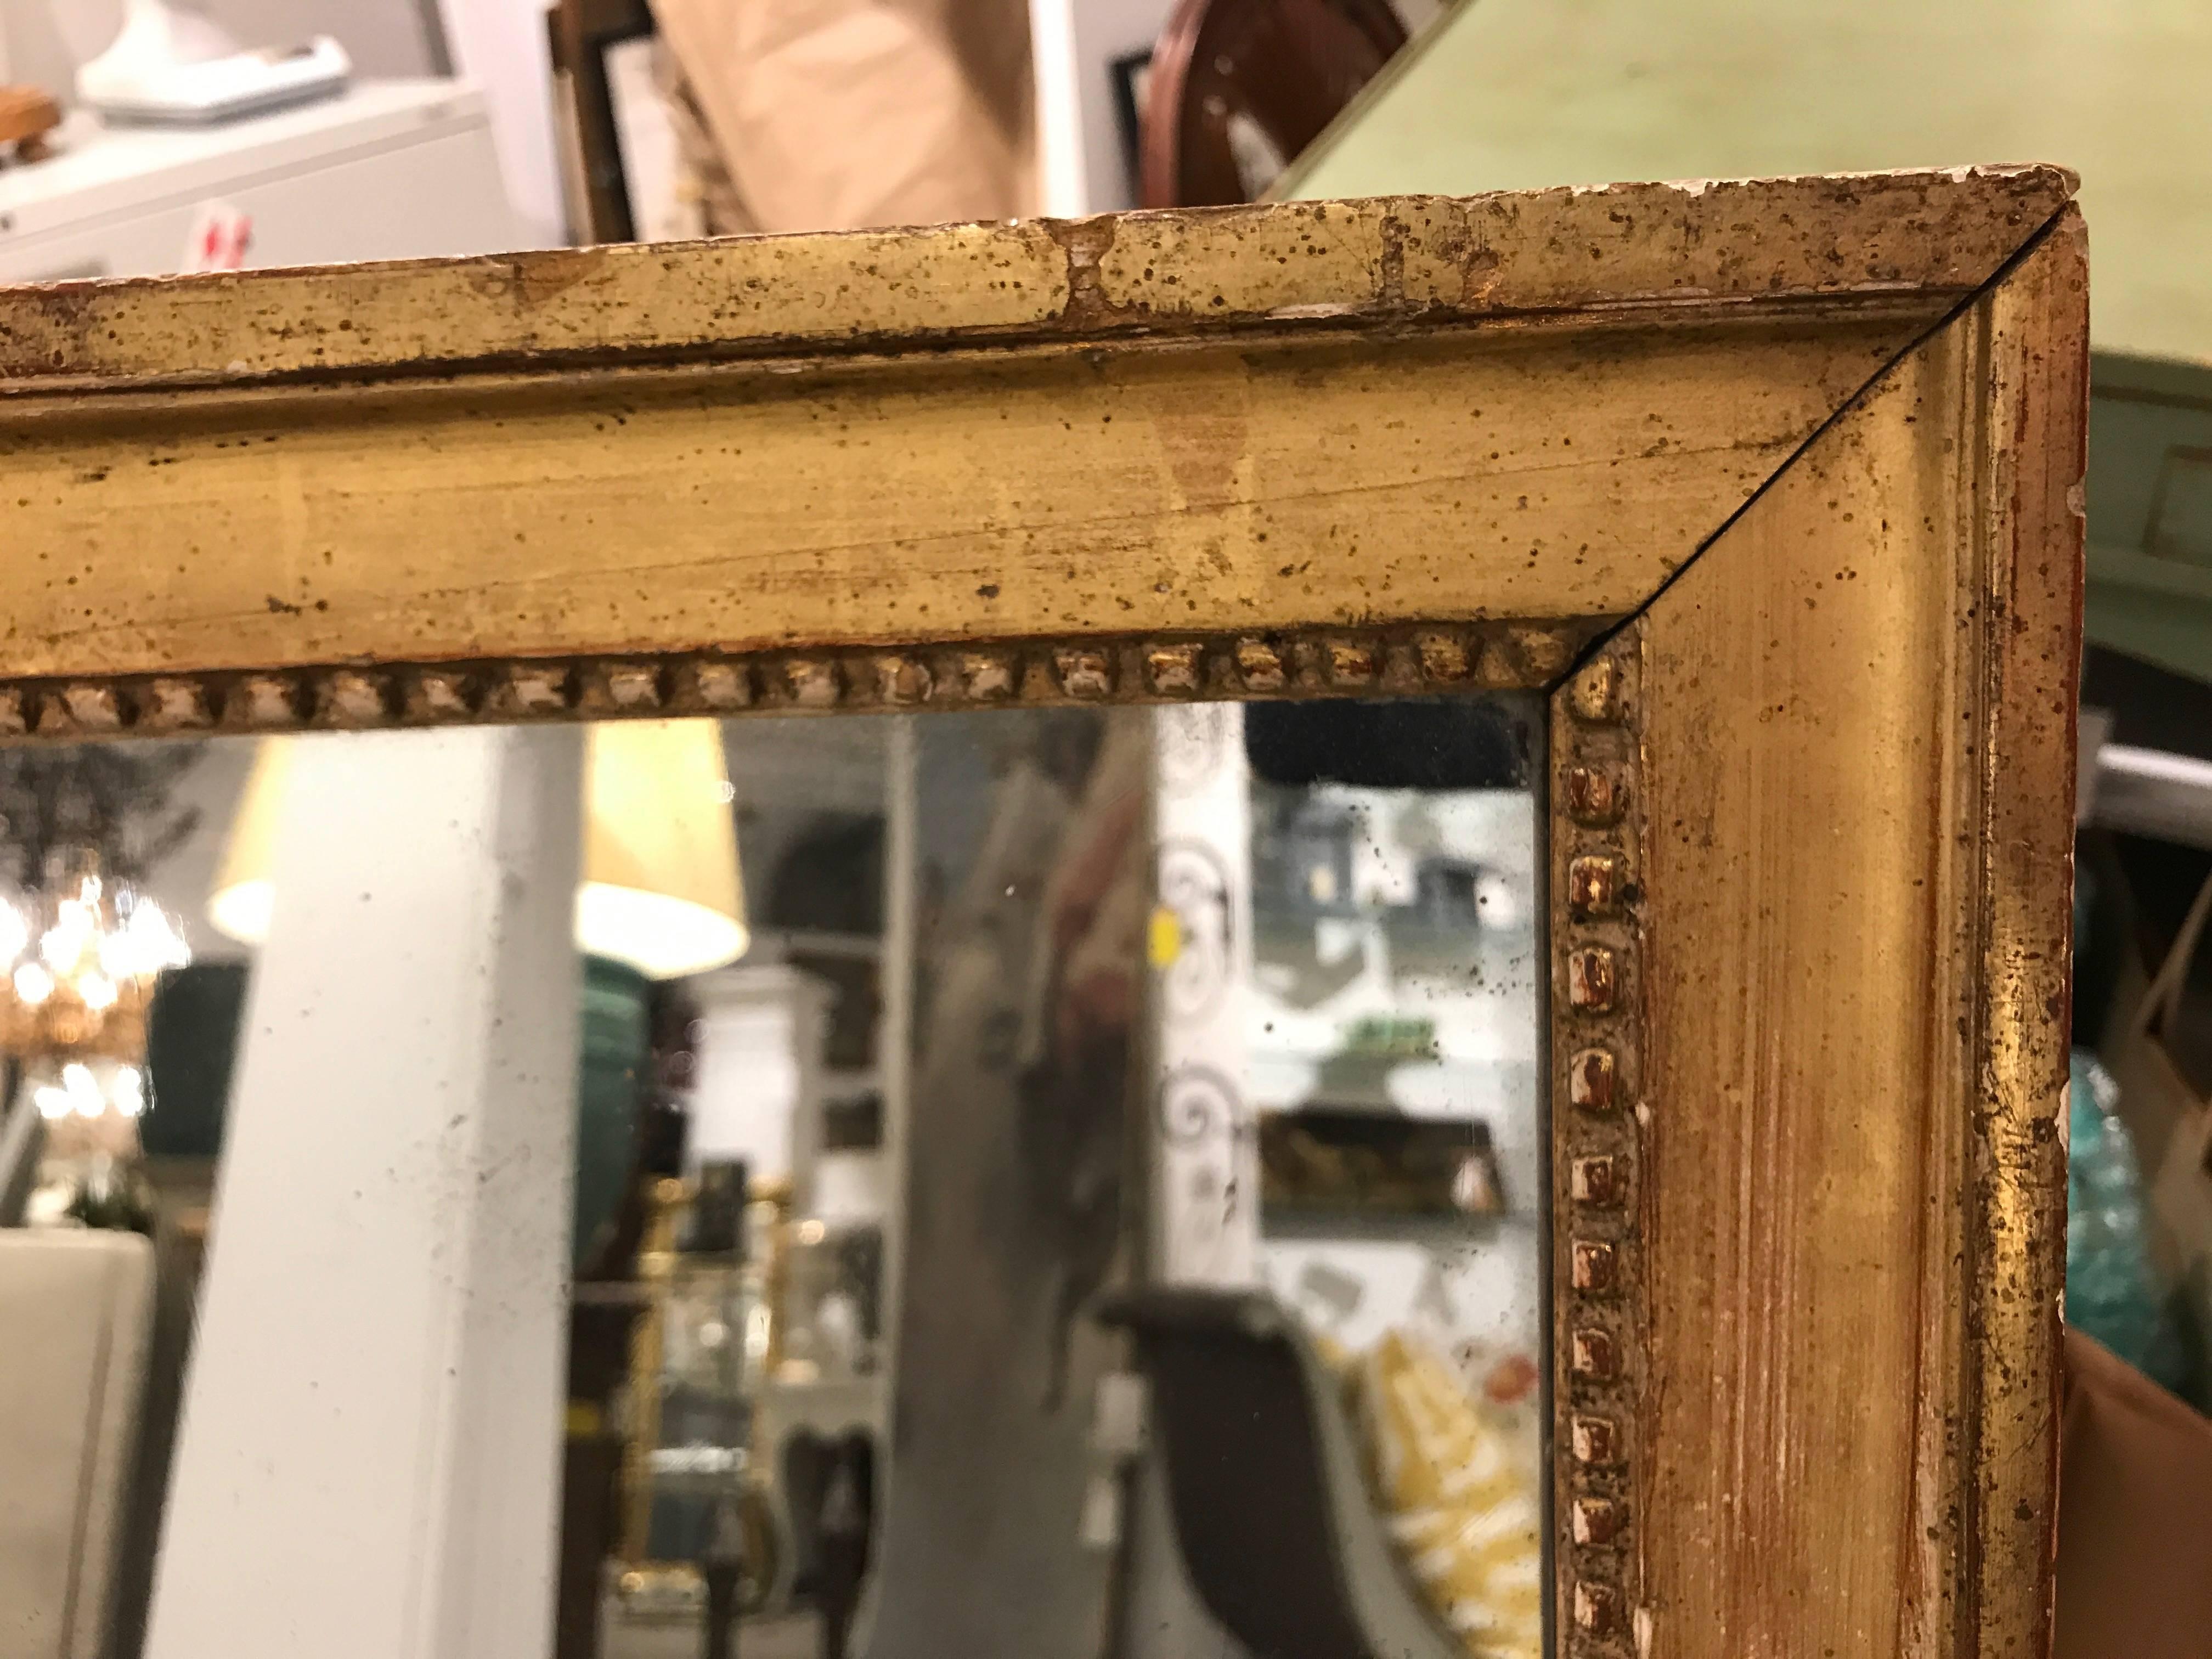 French 19th Century Giltwood Mirror